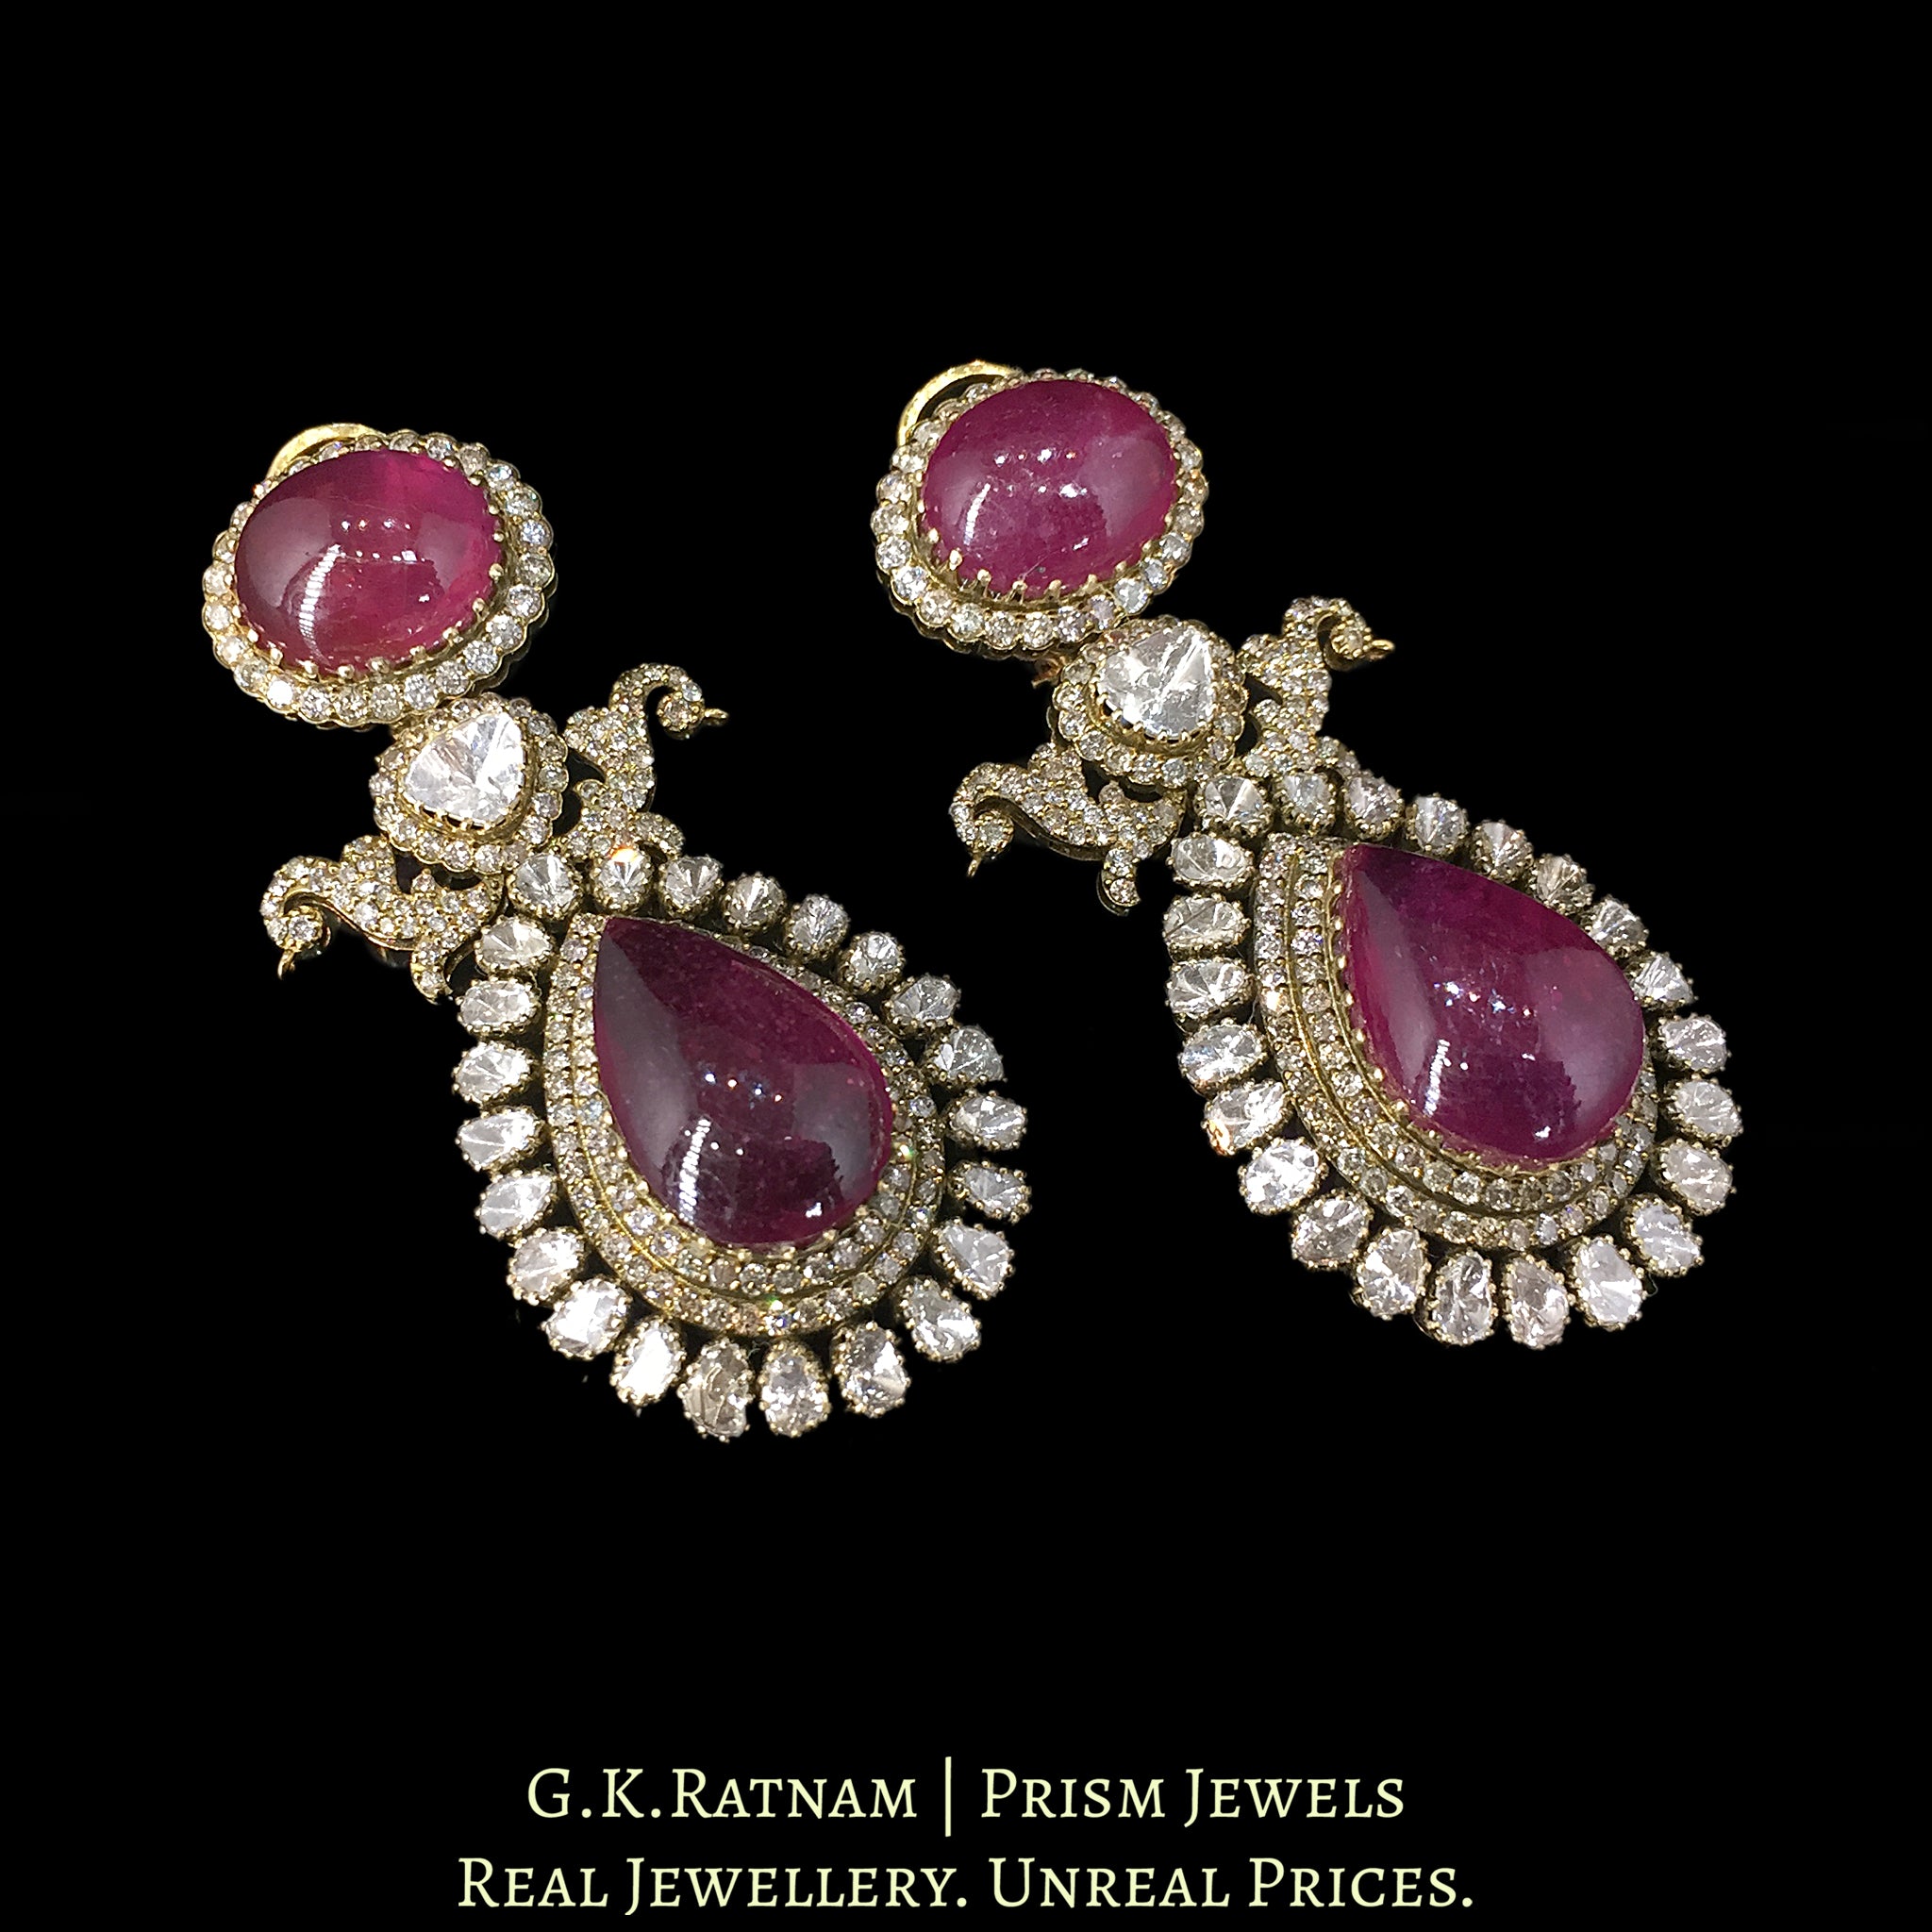 18k Gold and Diamond Polki Open Setting victorian-finish Long Earring Pair with Rubies